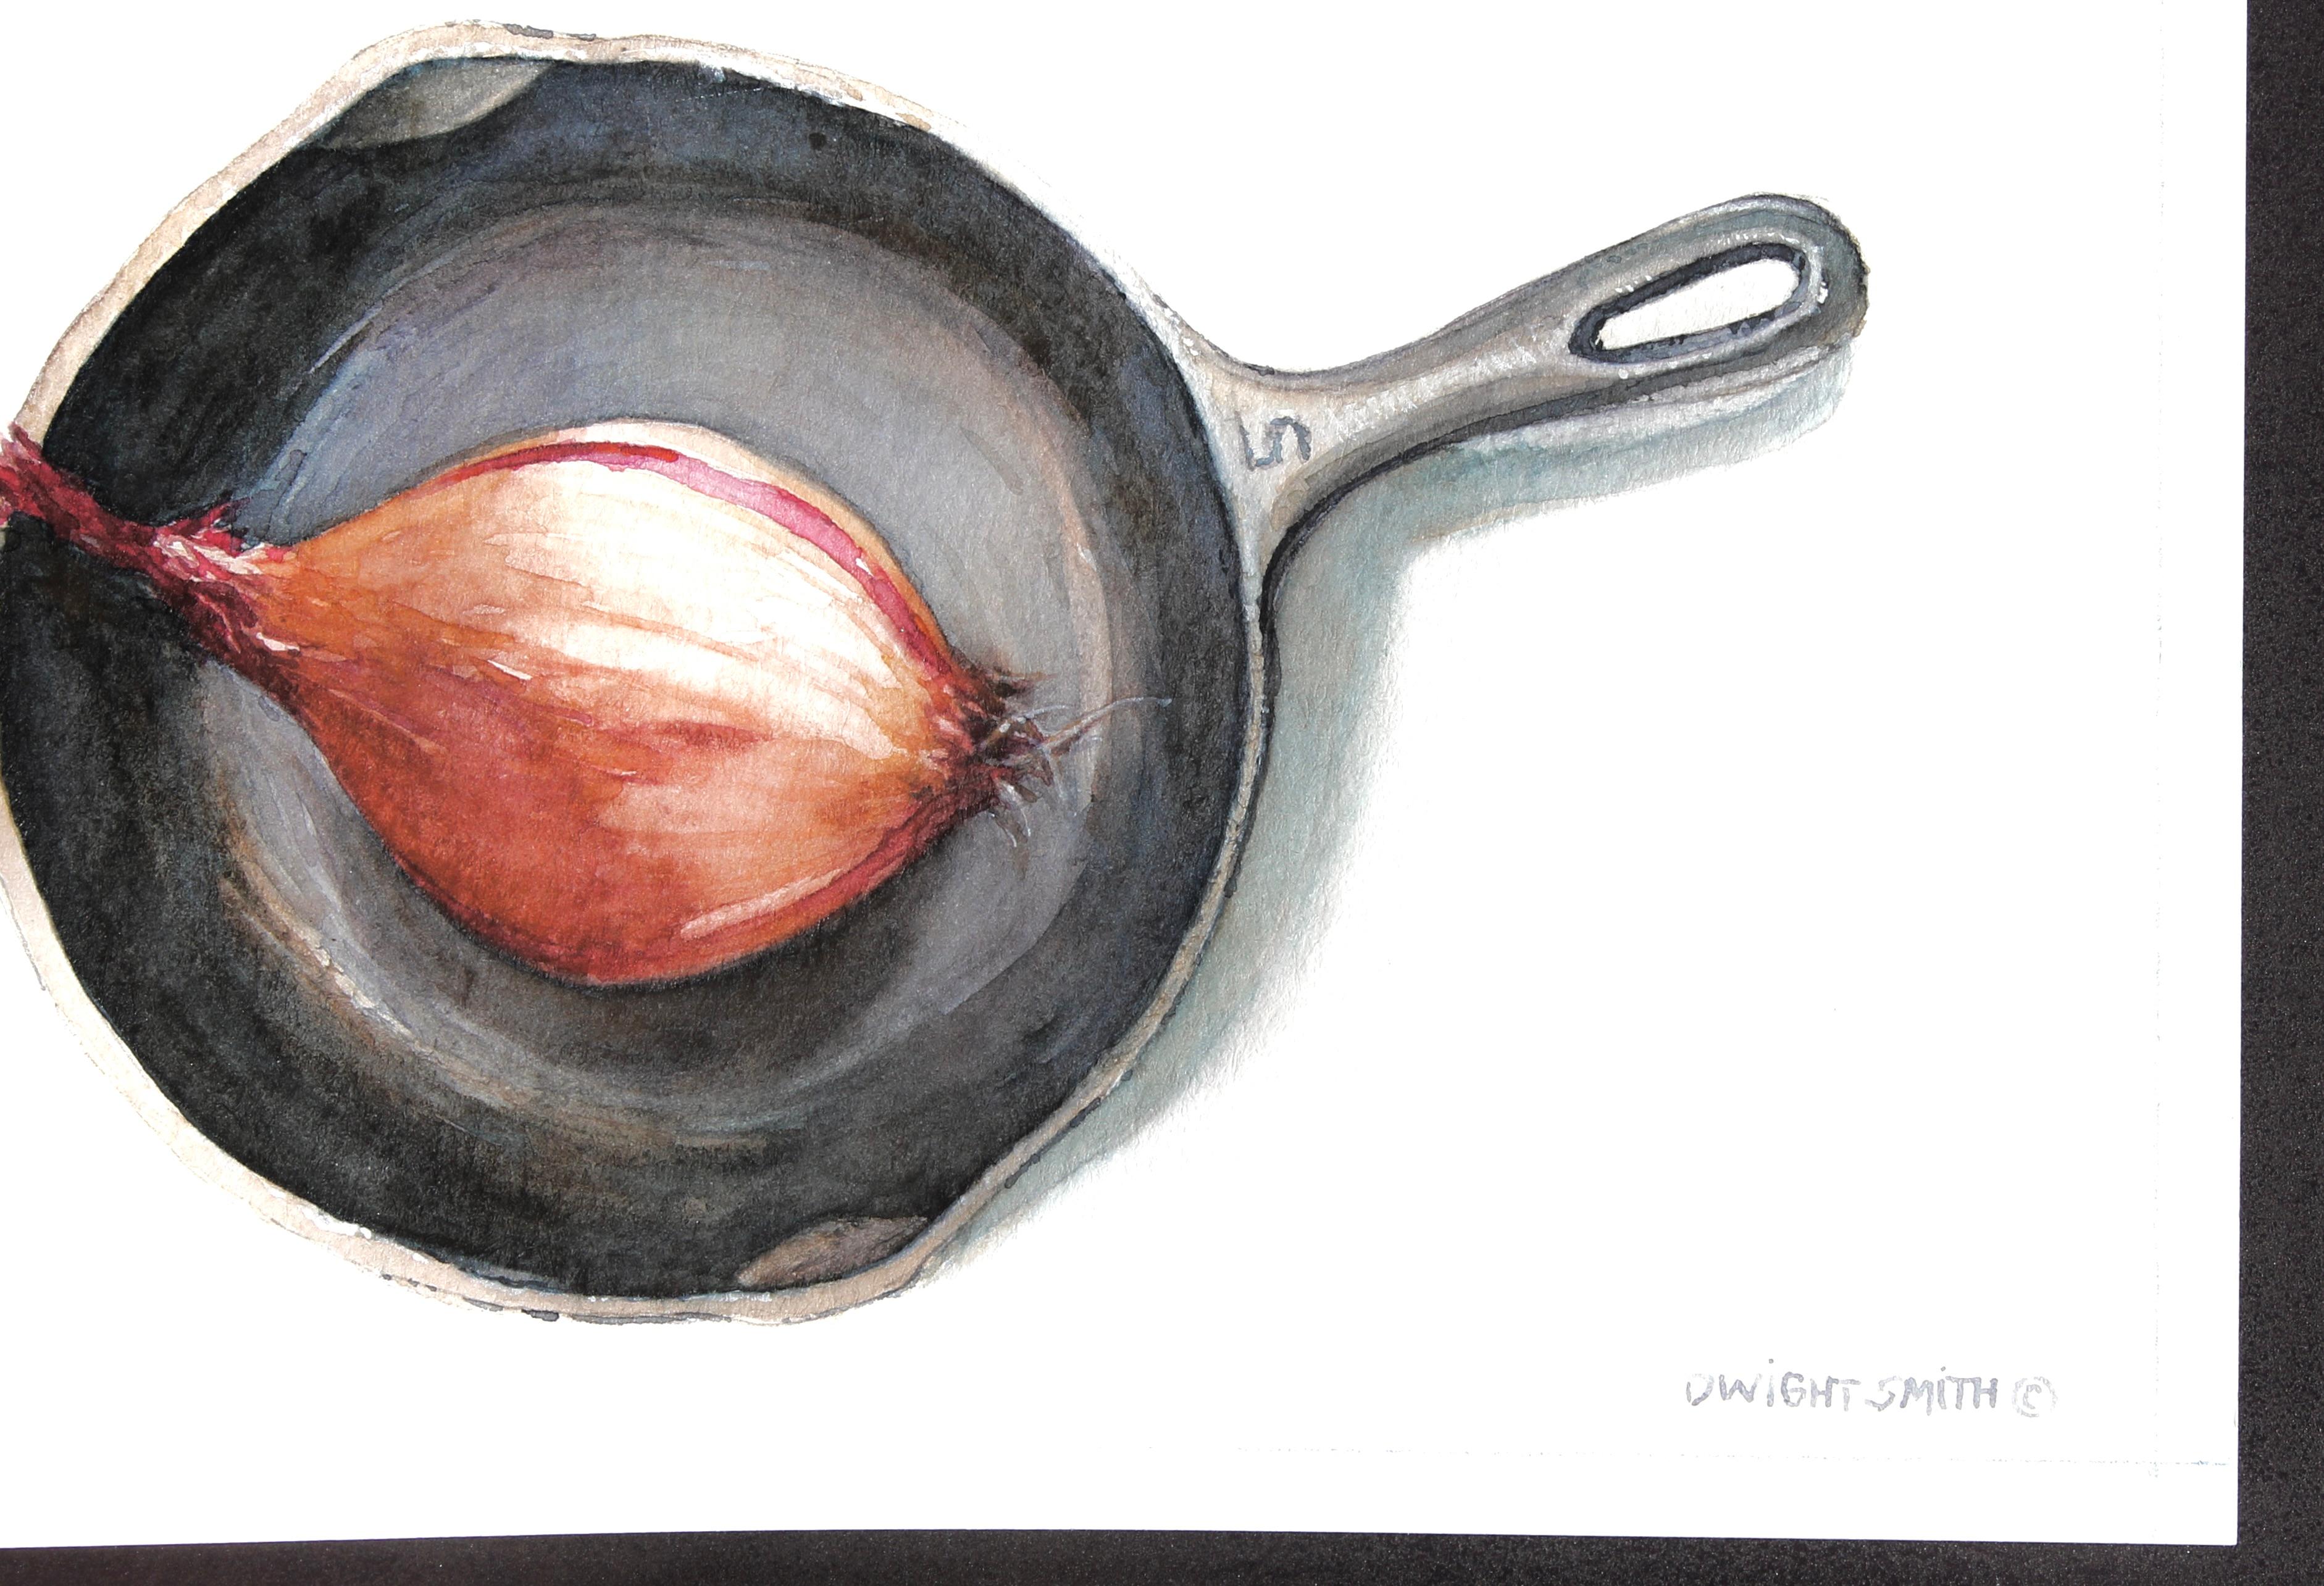 No. 5 with Shallot, Original Painting - Art by Dwight Smith